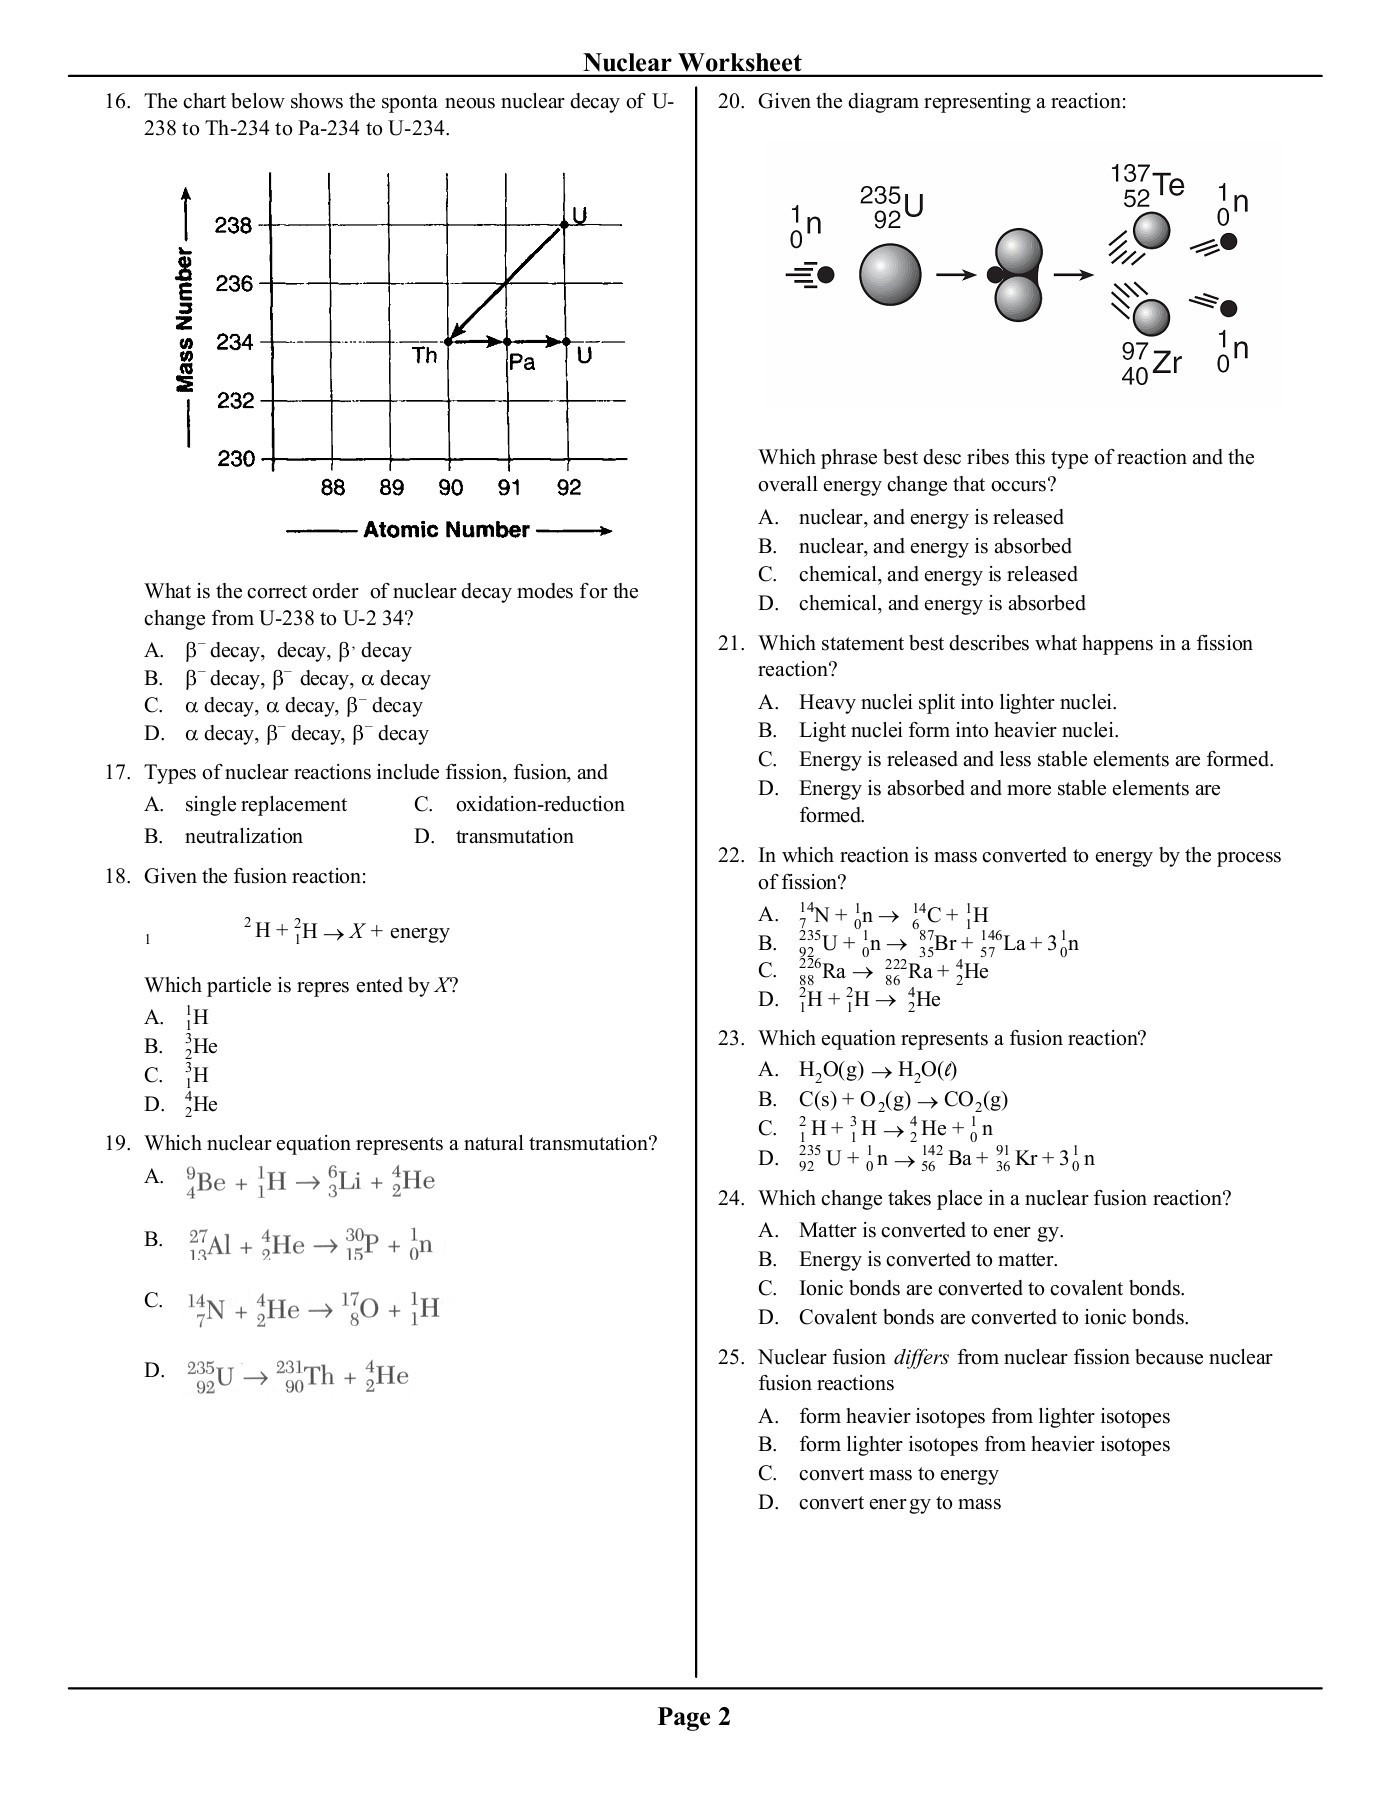 Nuclear Reactions Worksheet Answers Regents Review Nuclear Worksheet Mr Beauchamp Pages 1 5